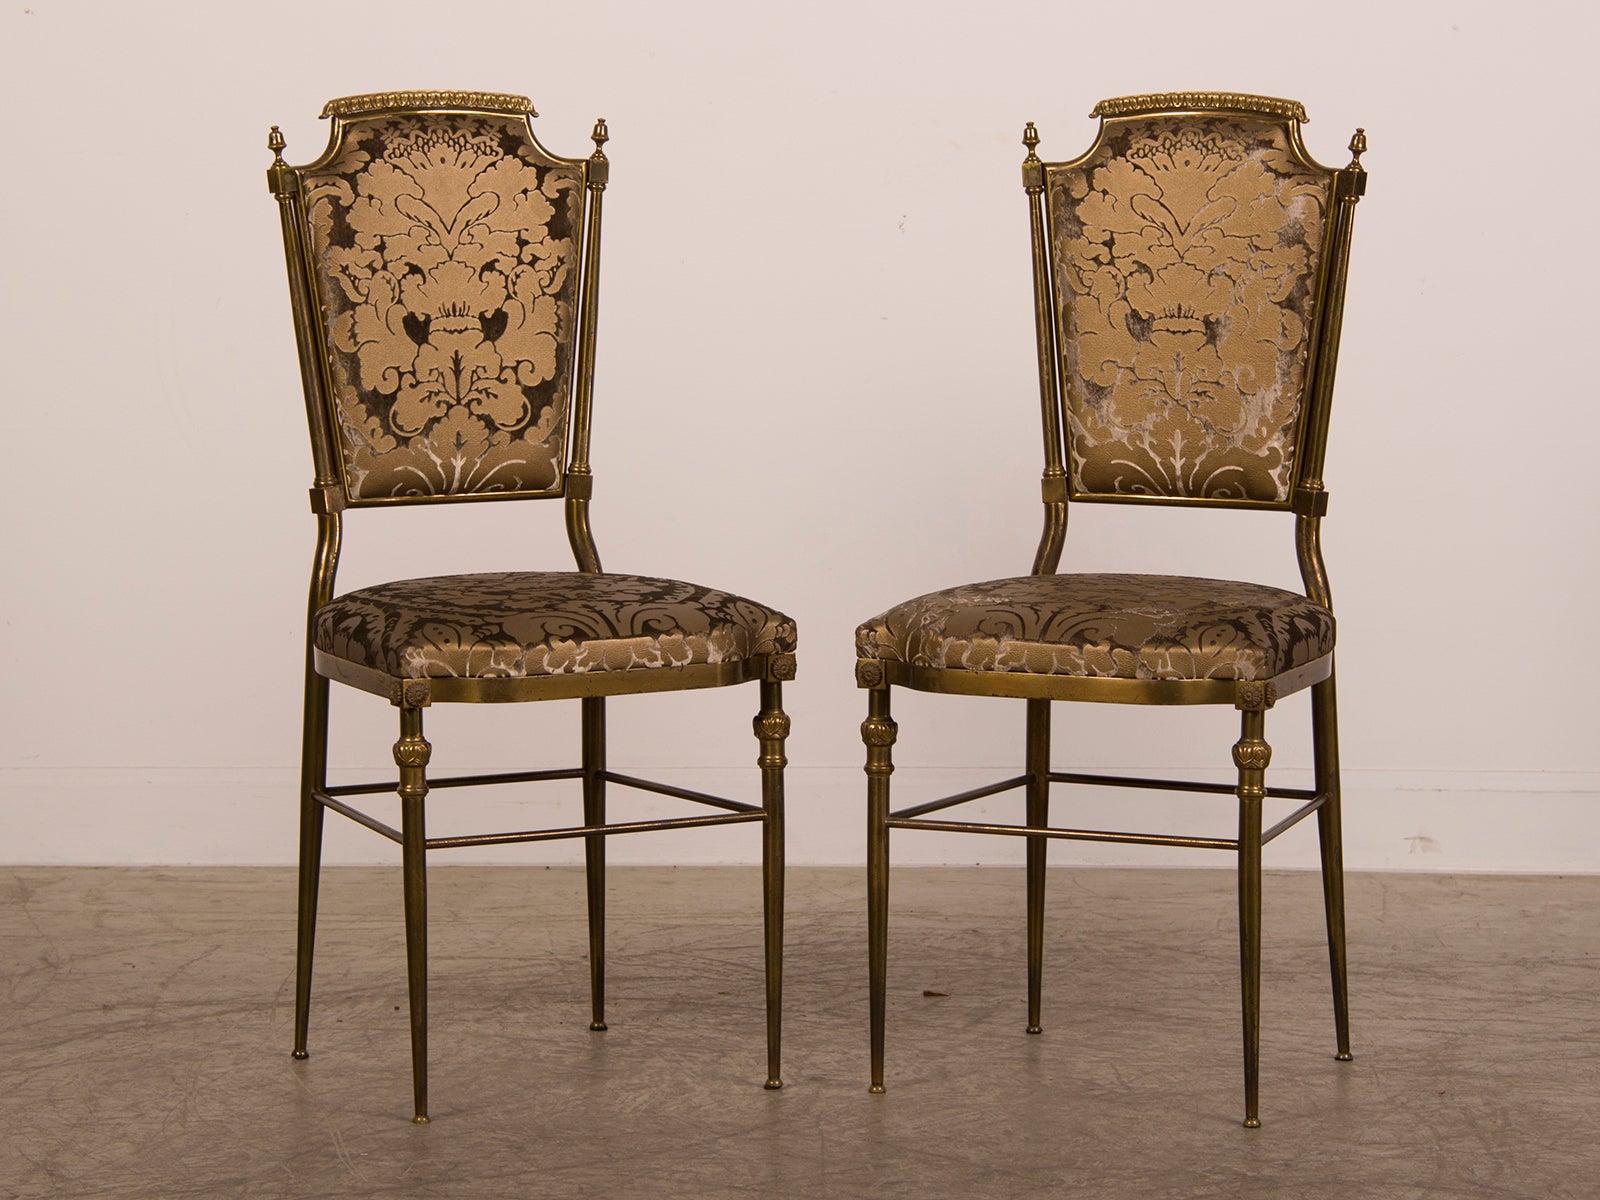 Pair of Vintage Italian Neoclassical Brass Side Chairs circa 1940